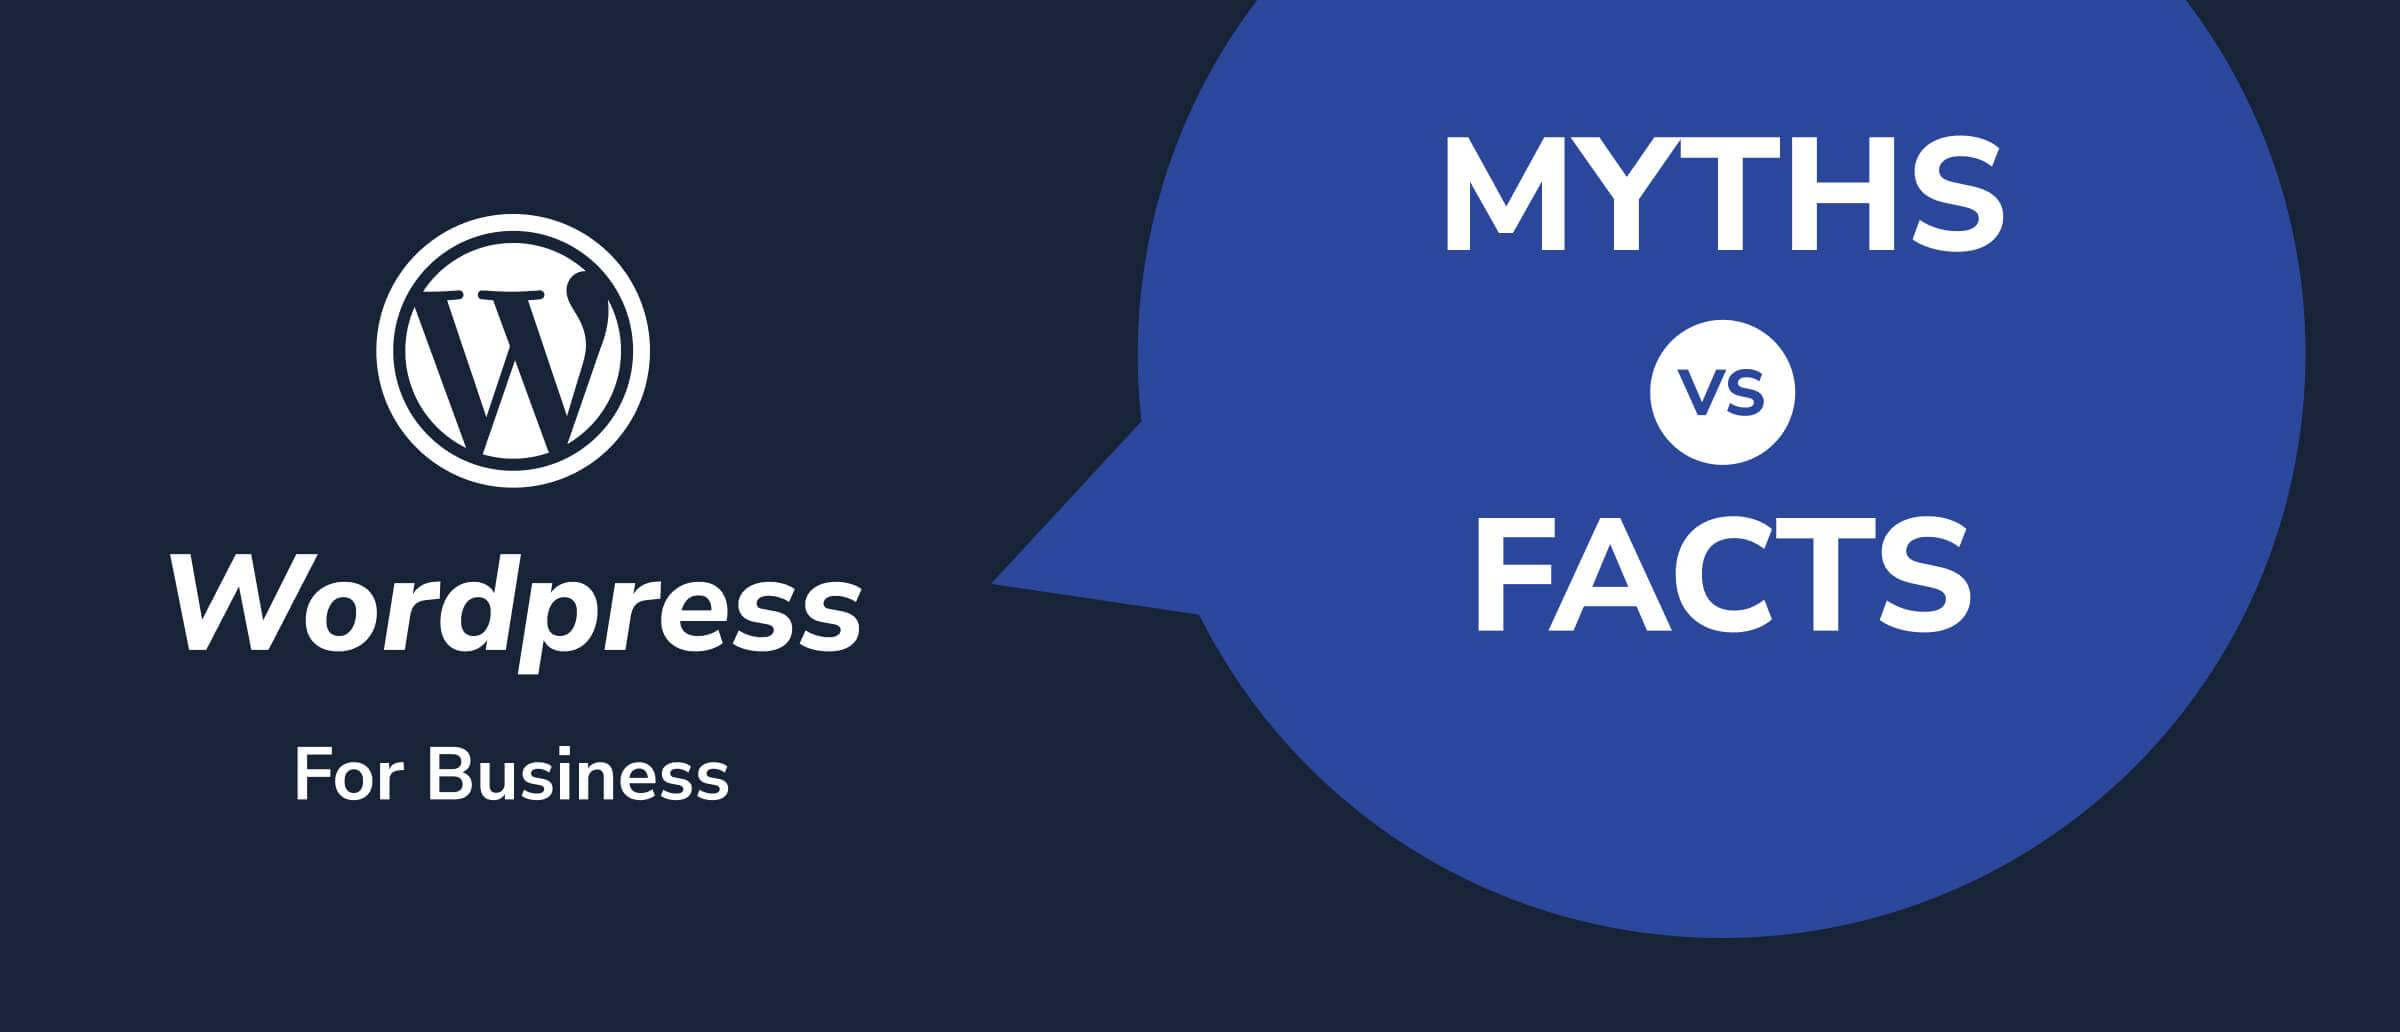 wordpress for business myth vs facts